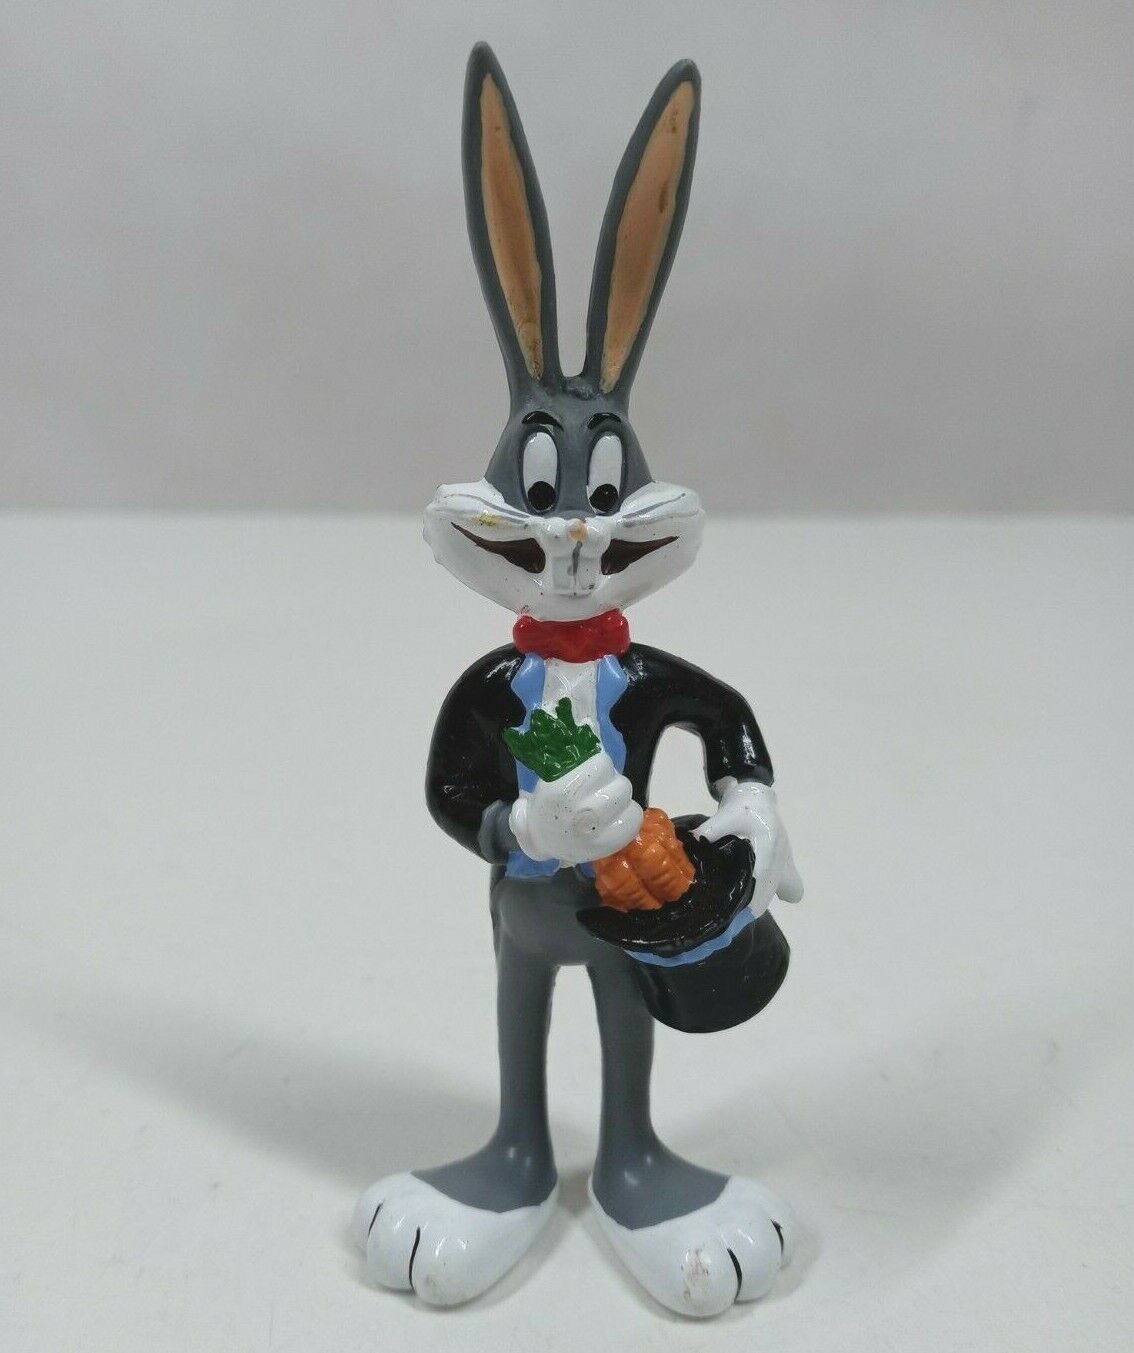 Primary image for Vintage 1988 Applause Warner Bros Looney Tunes Bugs Bunny Magician 3.5" Figure